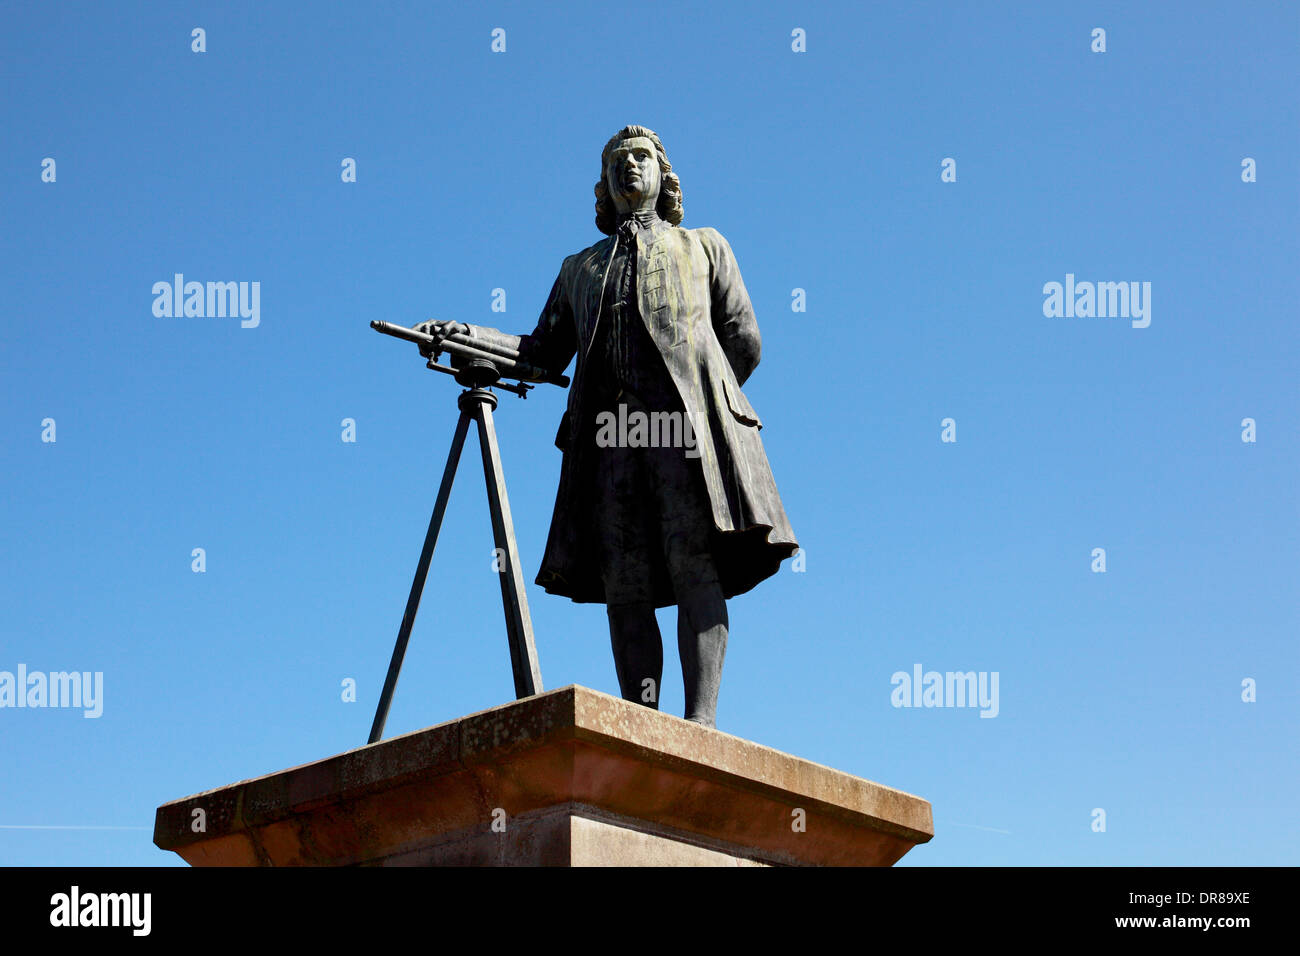 A bronze statue of the great canal engineer James Brindley by the Caldon Canal in Etruria, Stoke on Trent Stock Photo